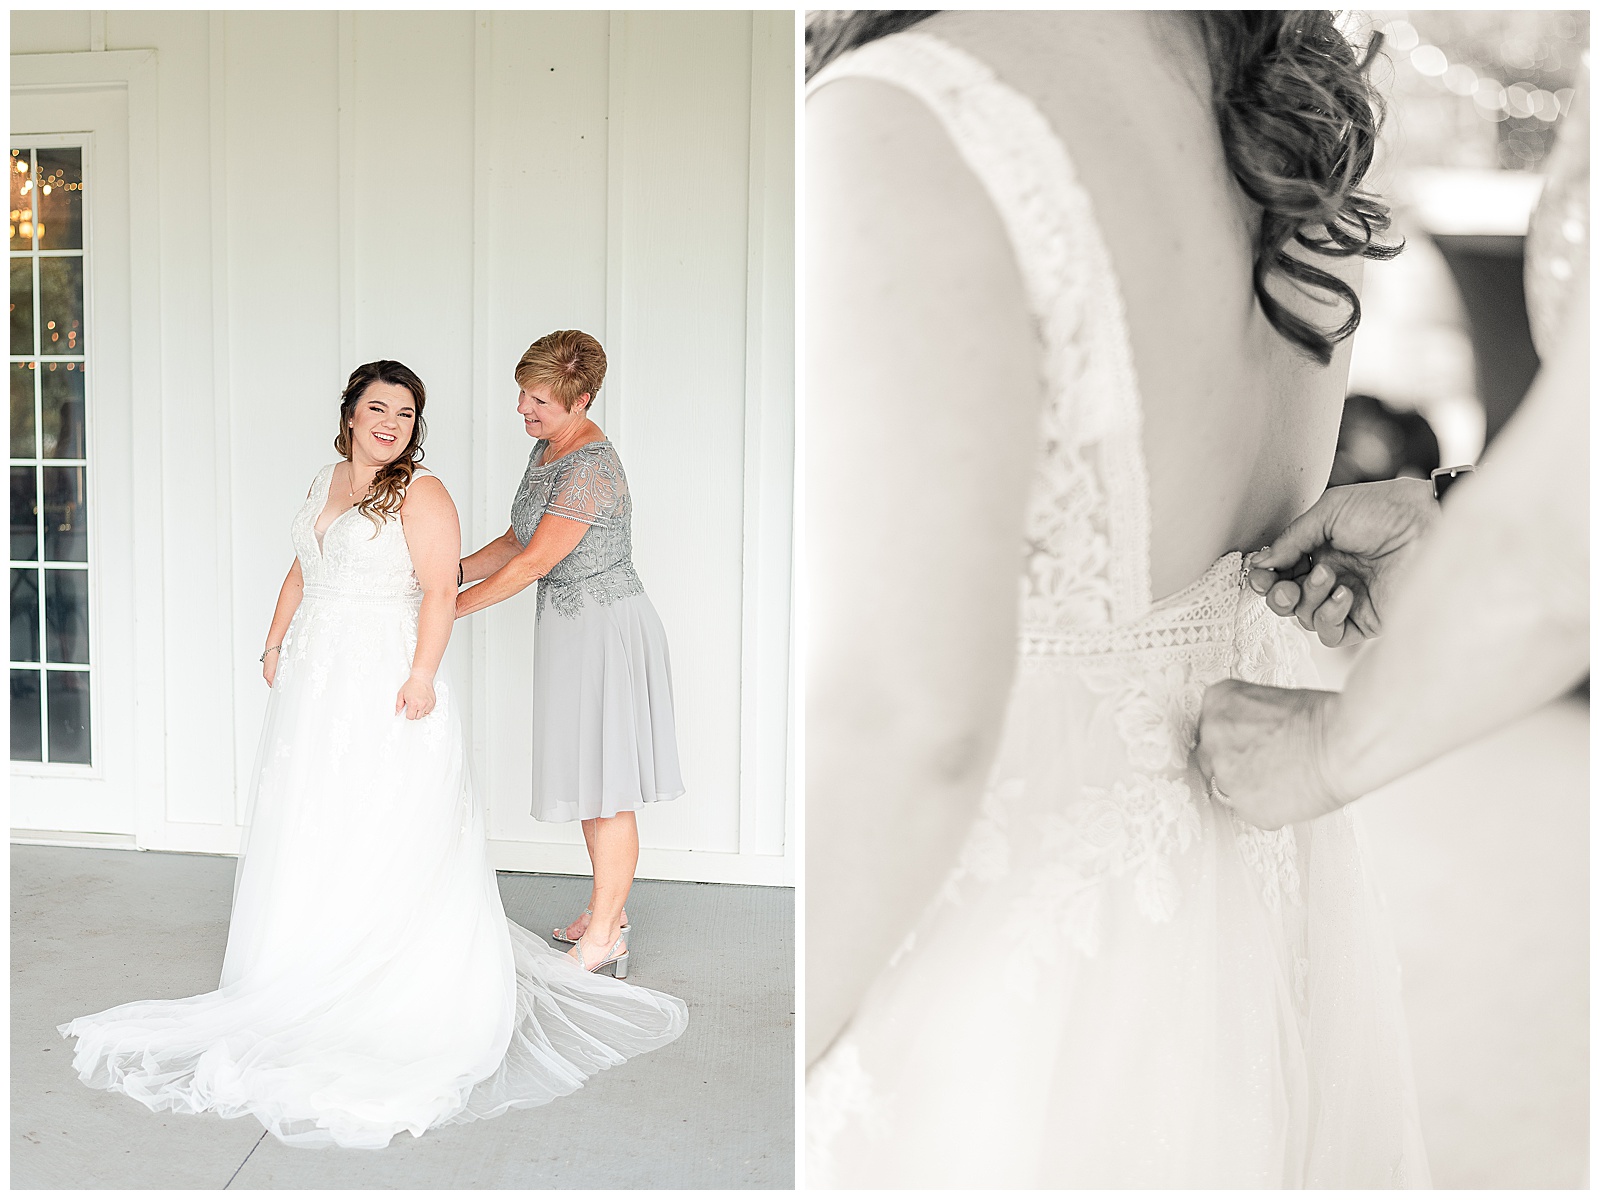 The bride putting on her wedding dress with the help of her mother 